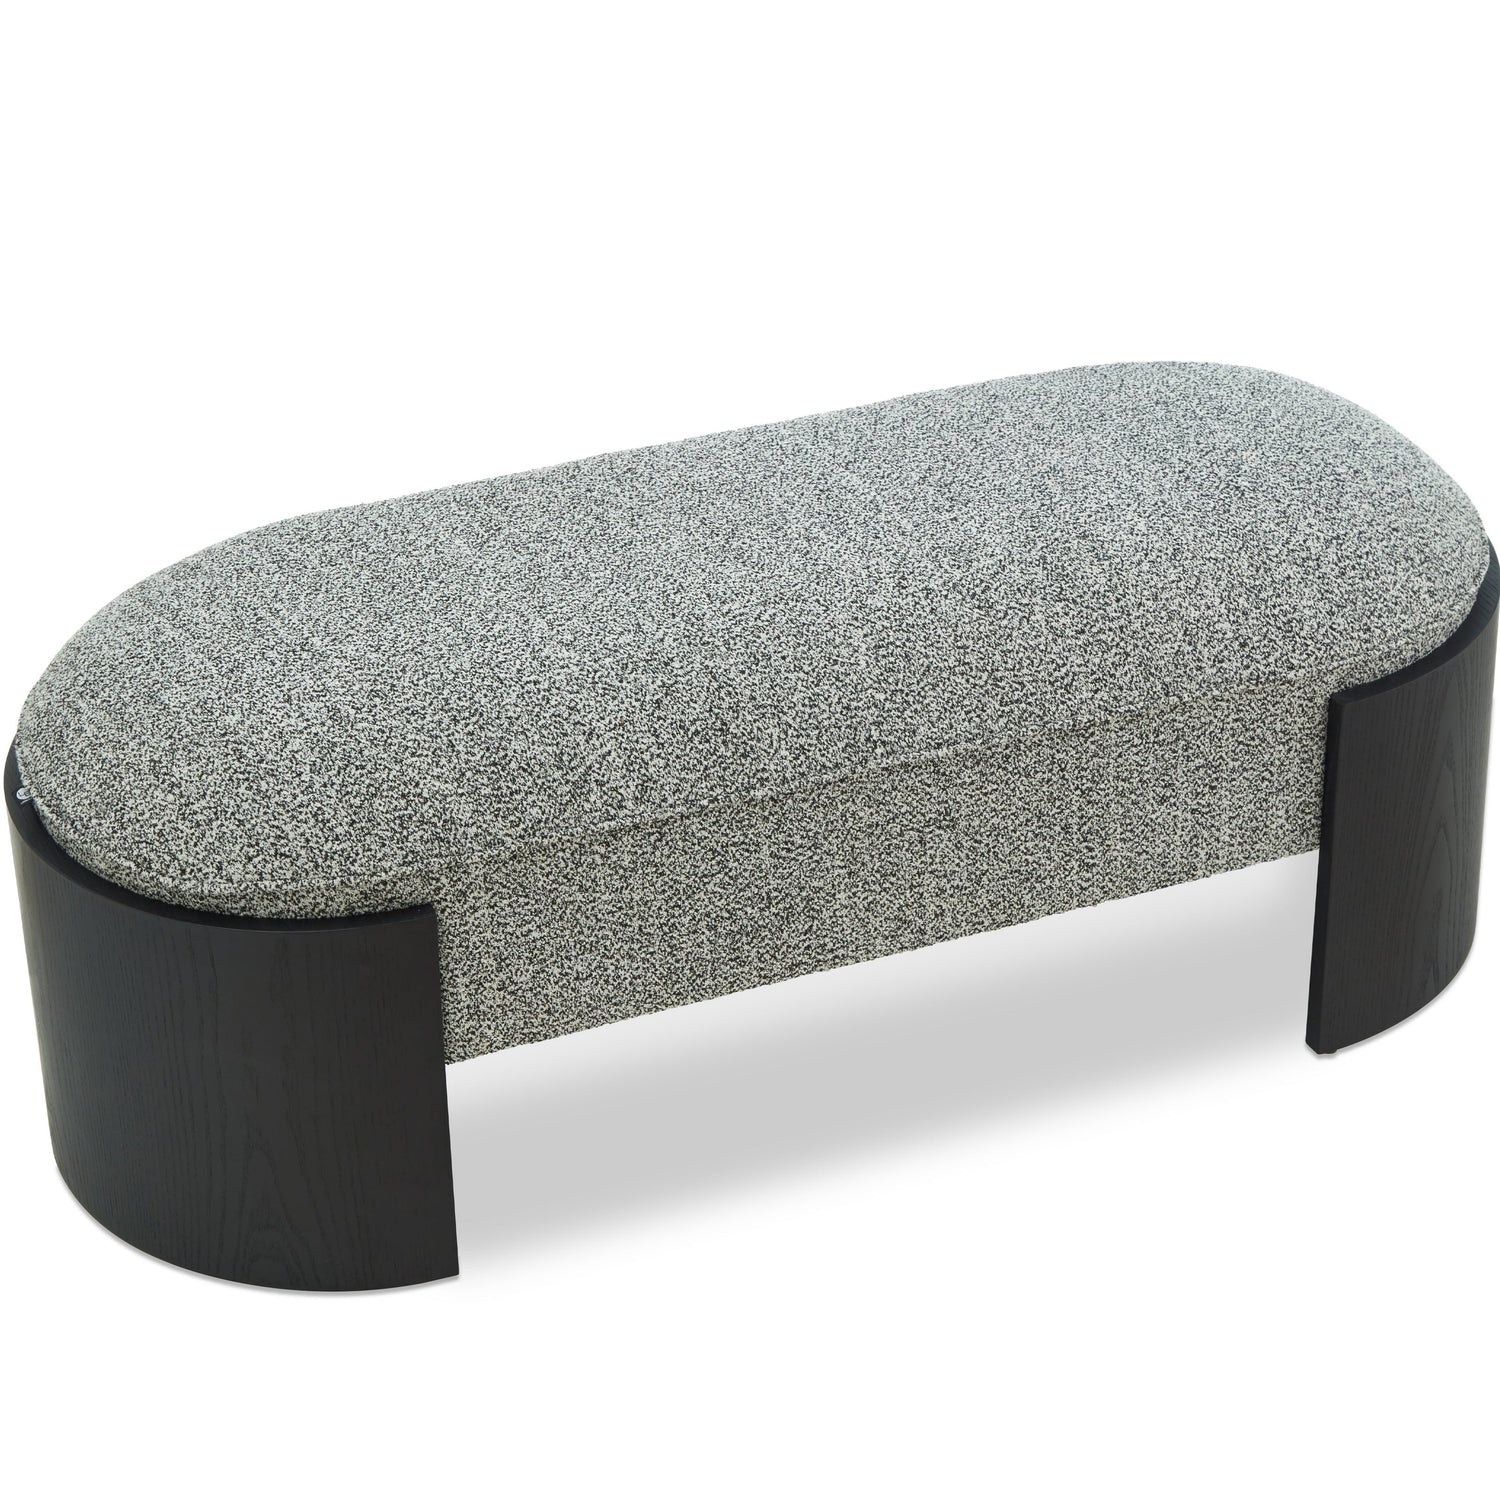  LiangAndEimil-Liang & Eimil Ed Long Bench in Cordoba Speckle Grey-Grey 005 